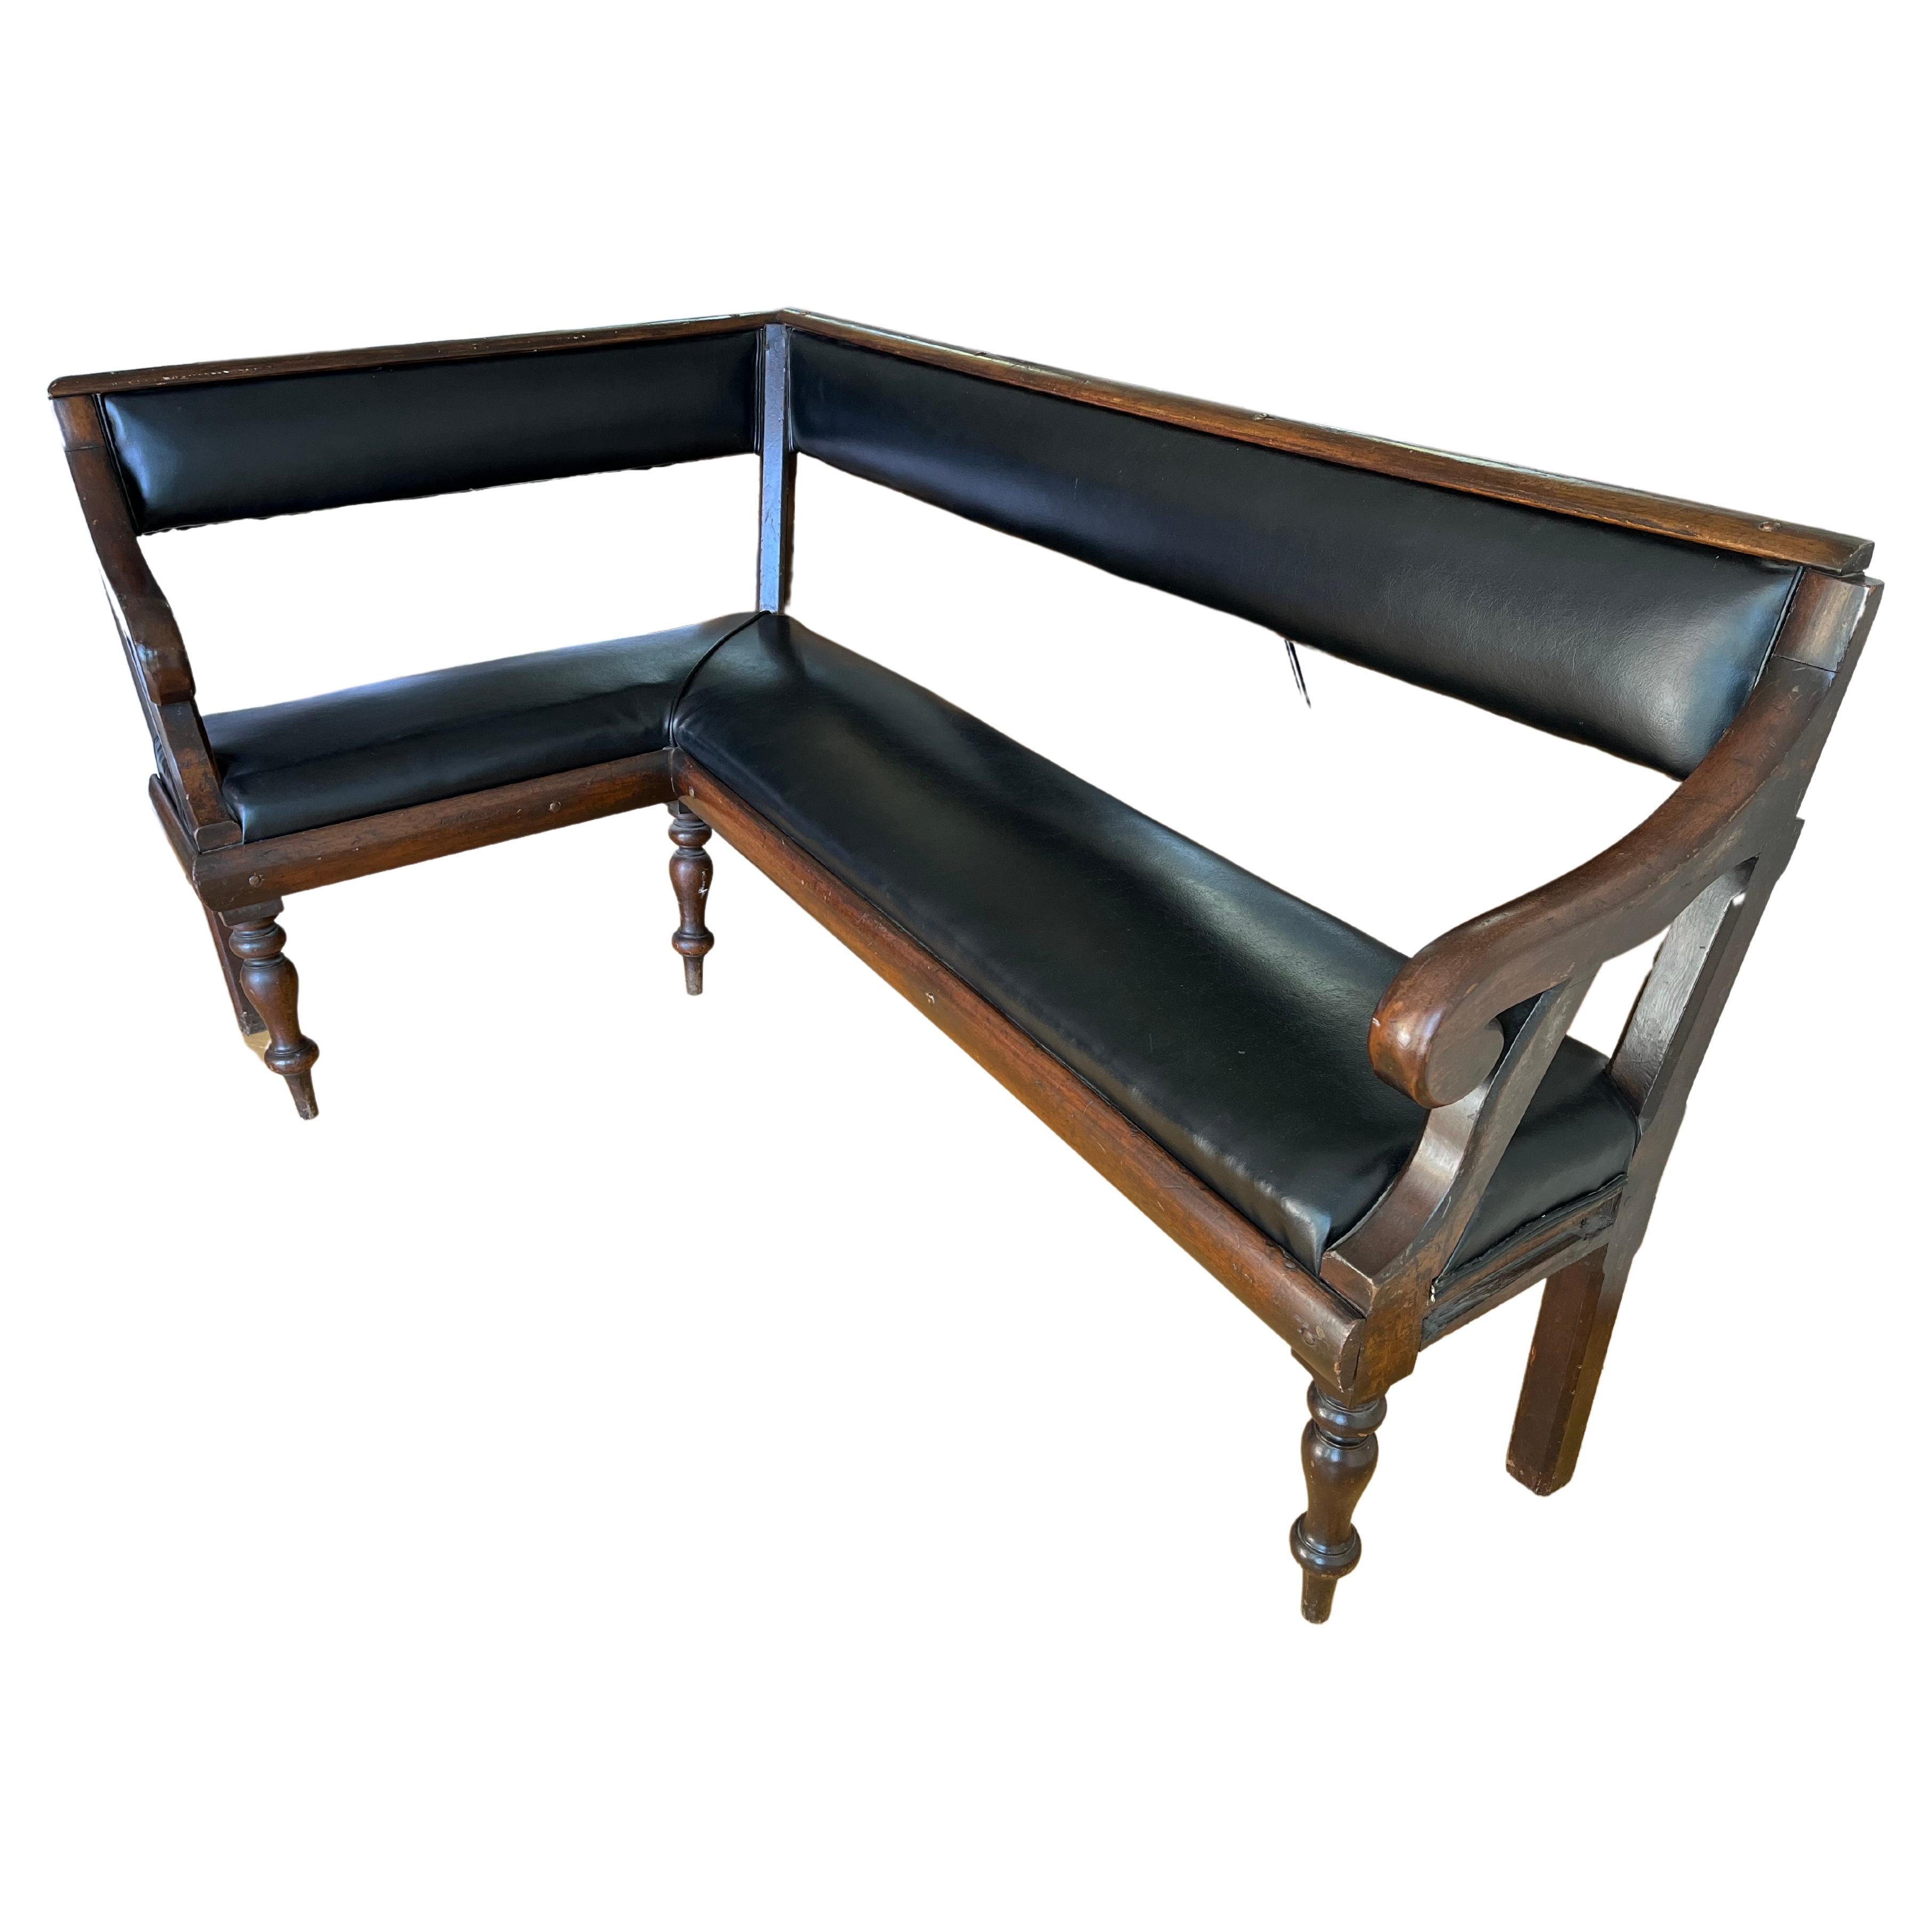 Vintage leather Banquette/bench, early 1900s.